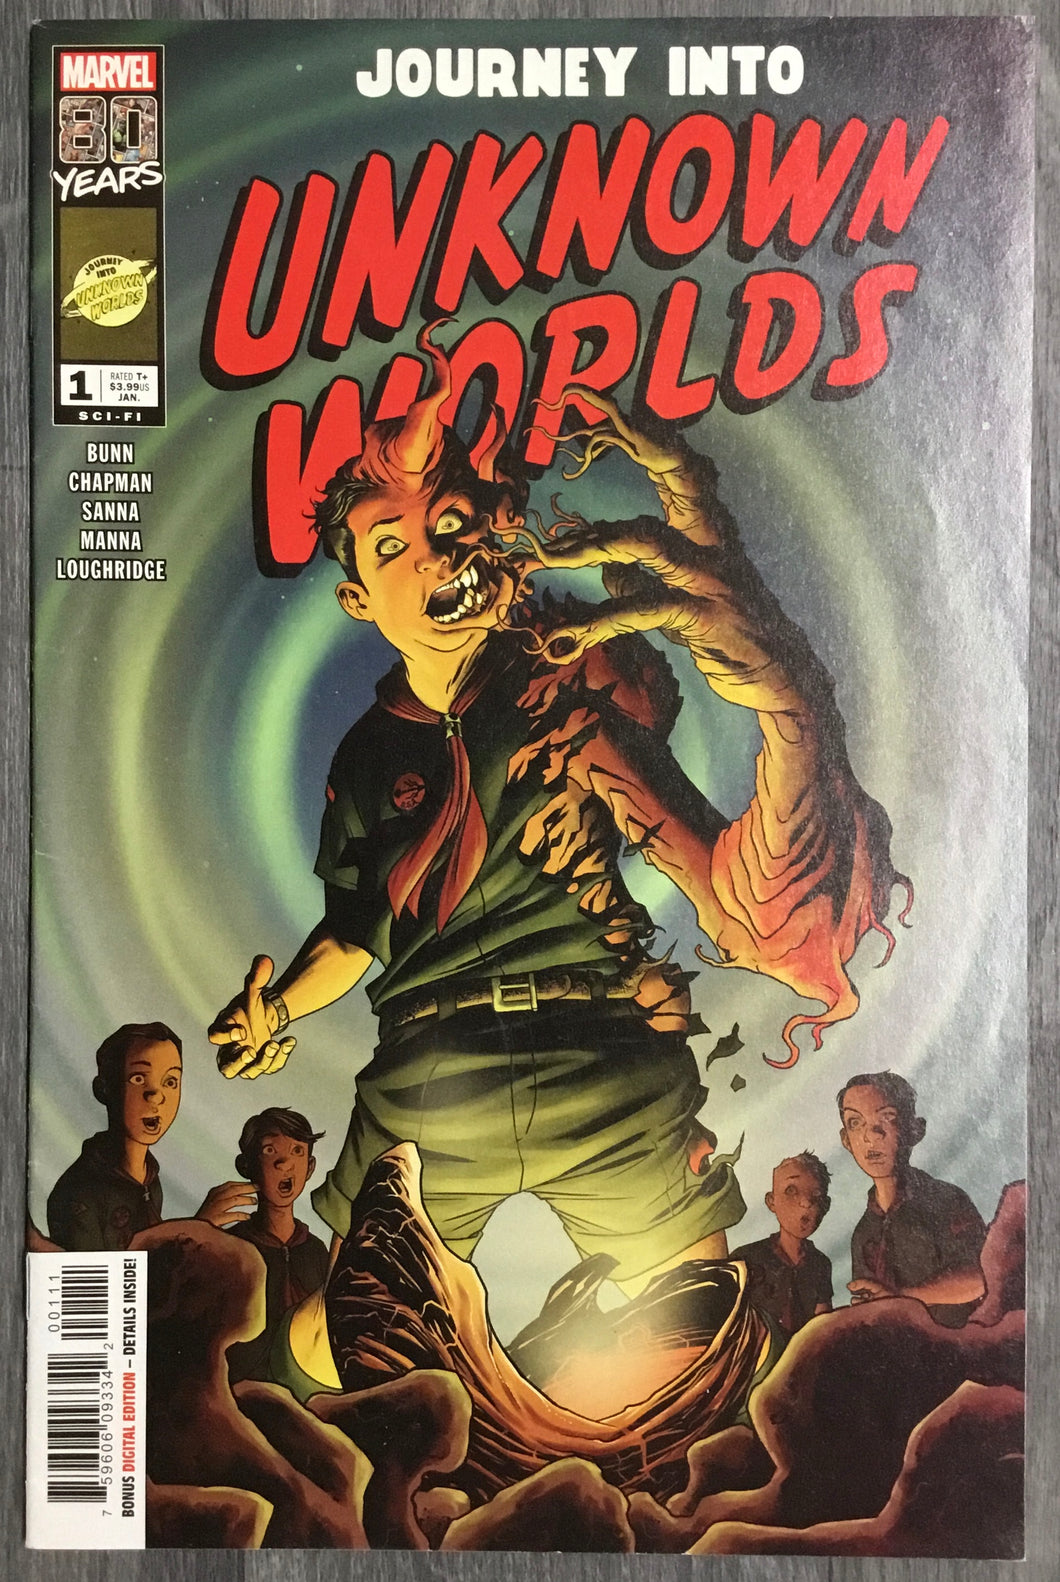 Journey into Unknown Worlds No. #1 2019 Marvel Comics